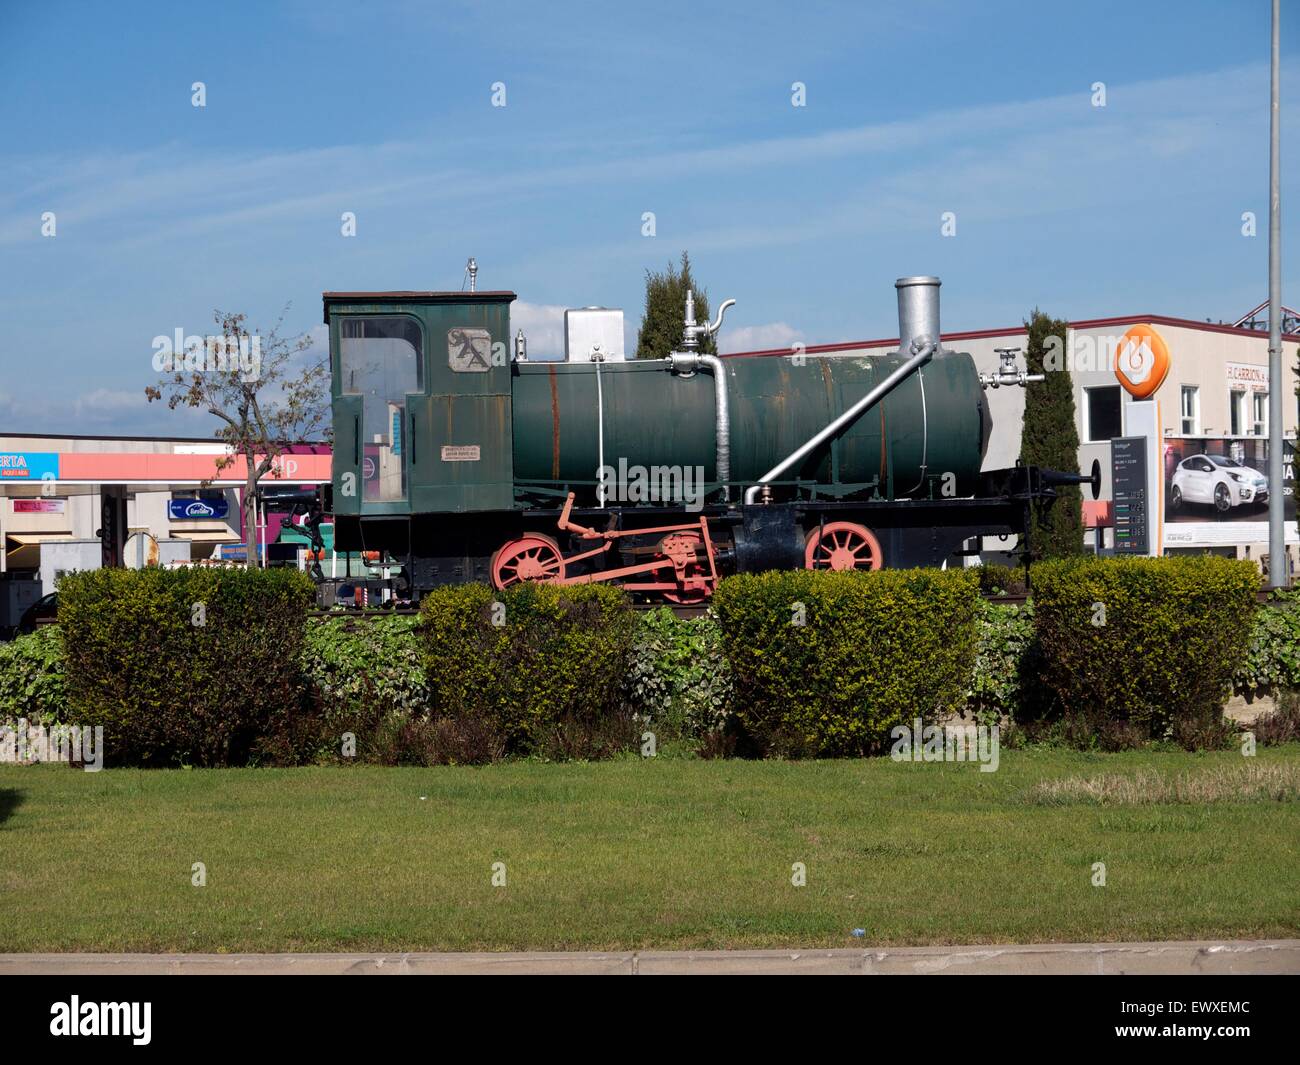 Train engine on a roundabout in Spain, indicating that the train station is here. Stock Photo